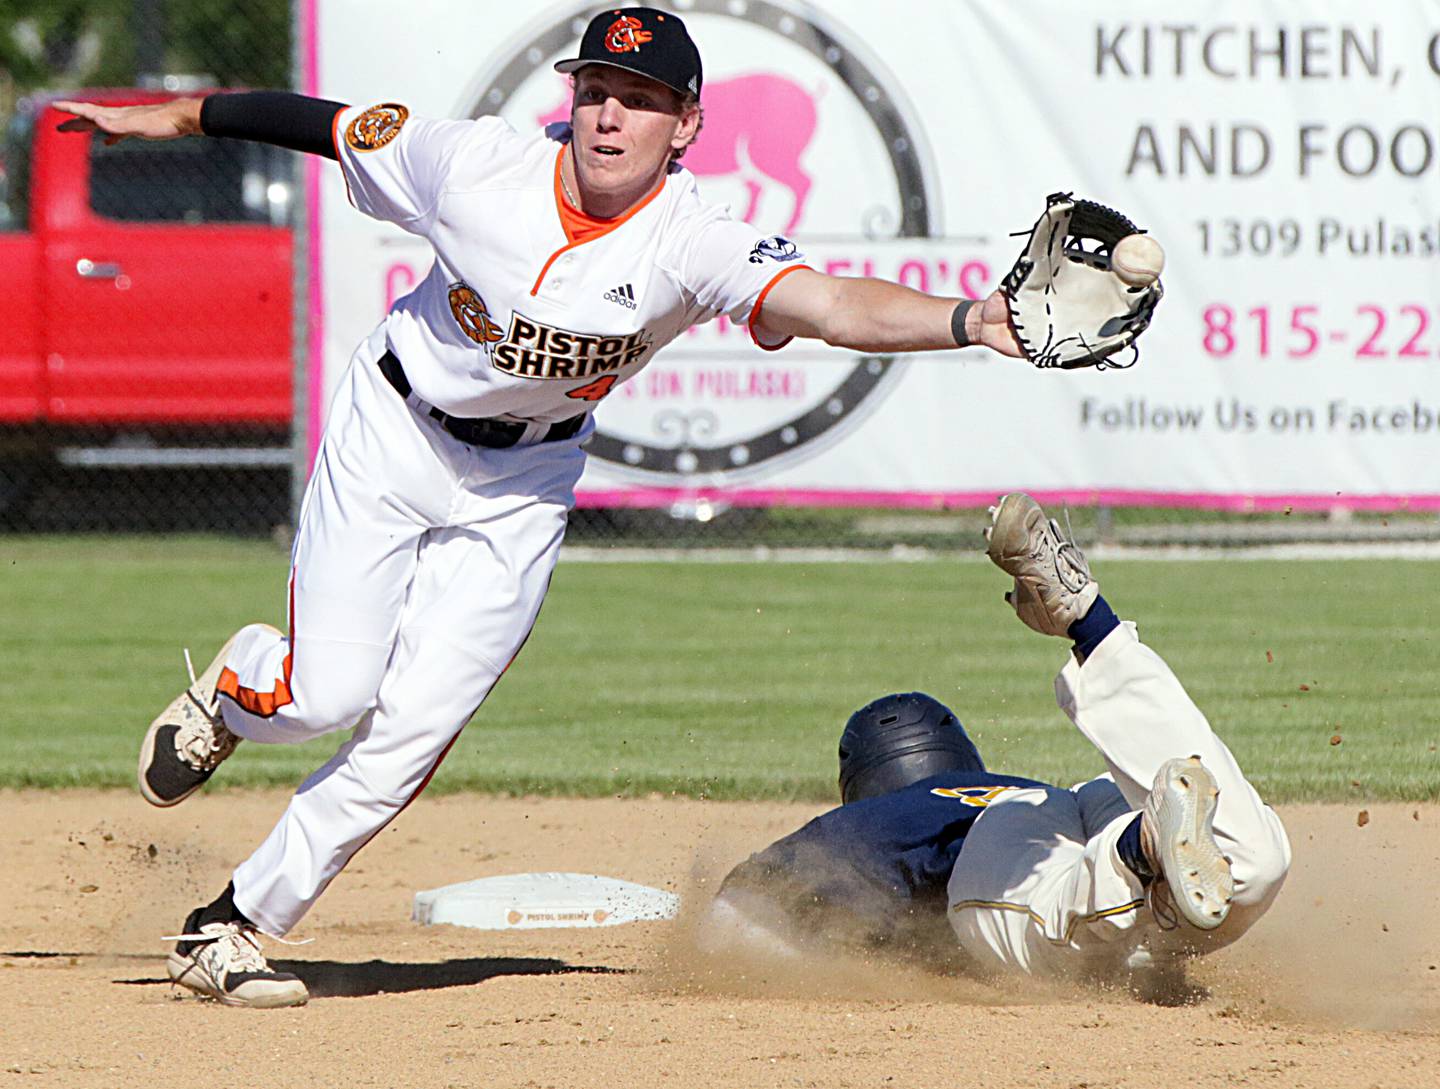 Illinois Valley Pistol Shrimp's Chance Resetich catches the ball at second base as Lafayette's Adrian Mella steals a base during the 2021 season.